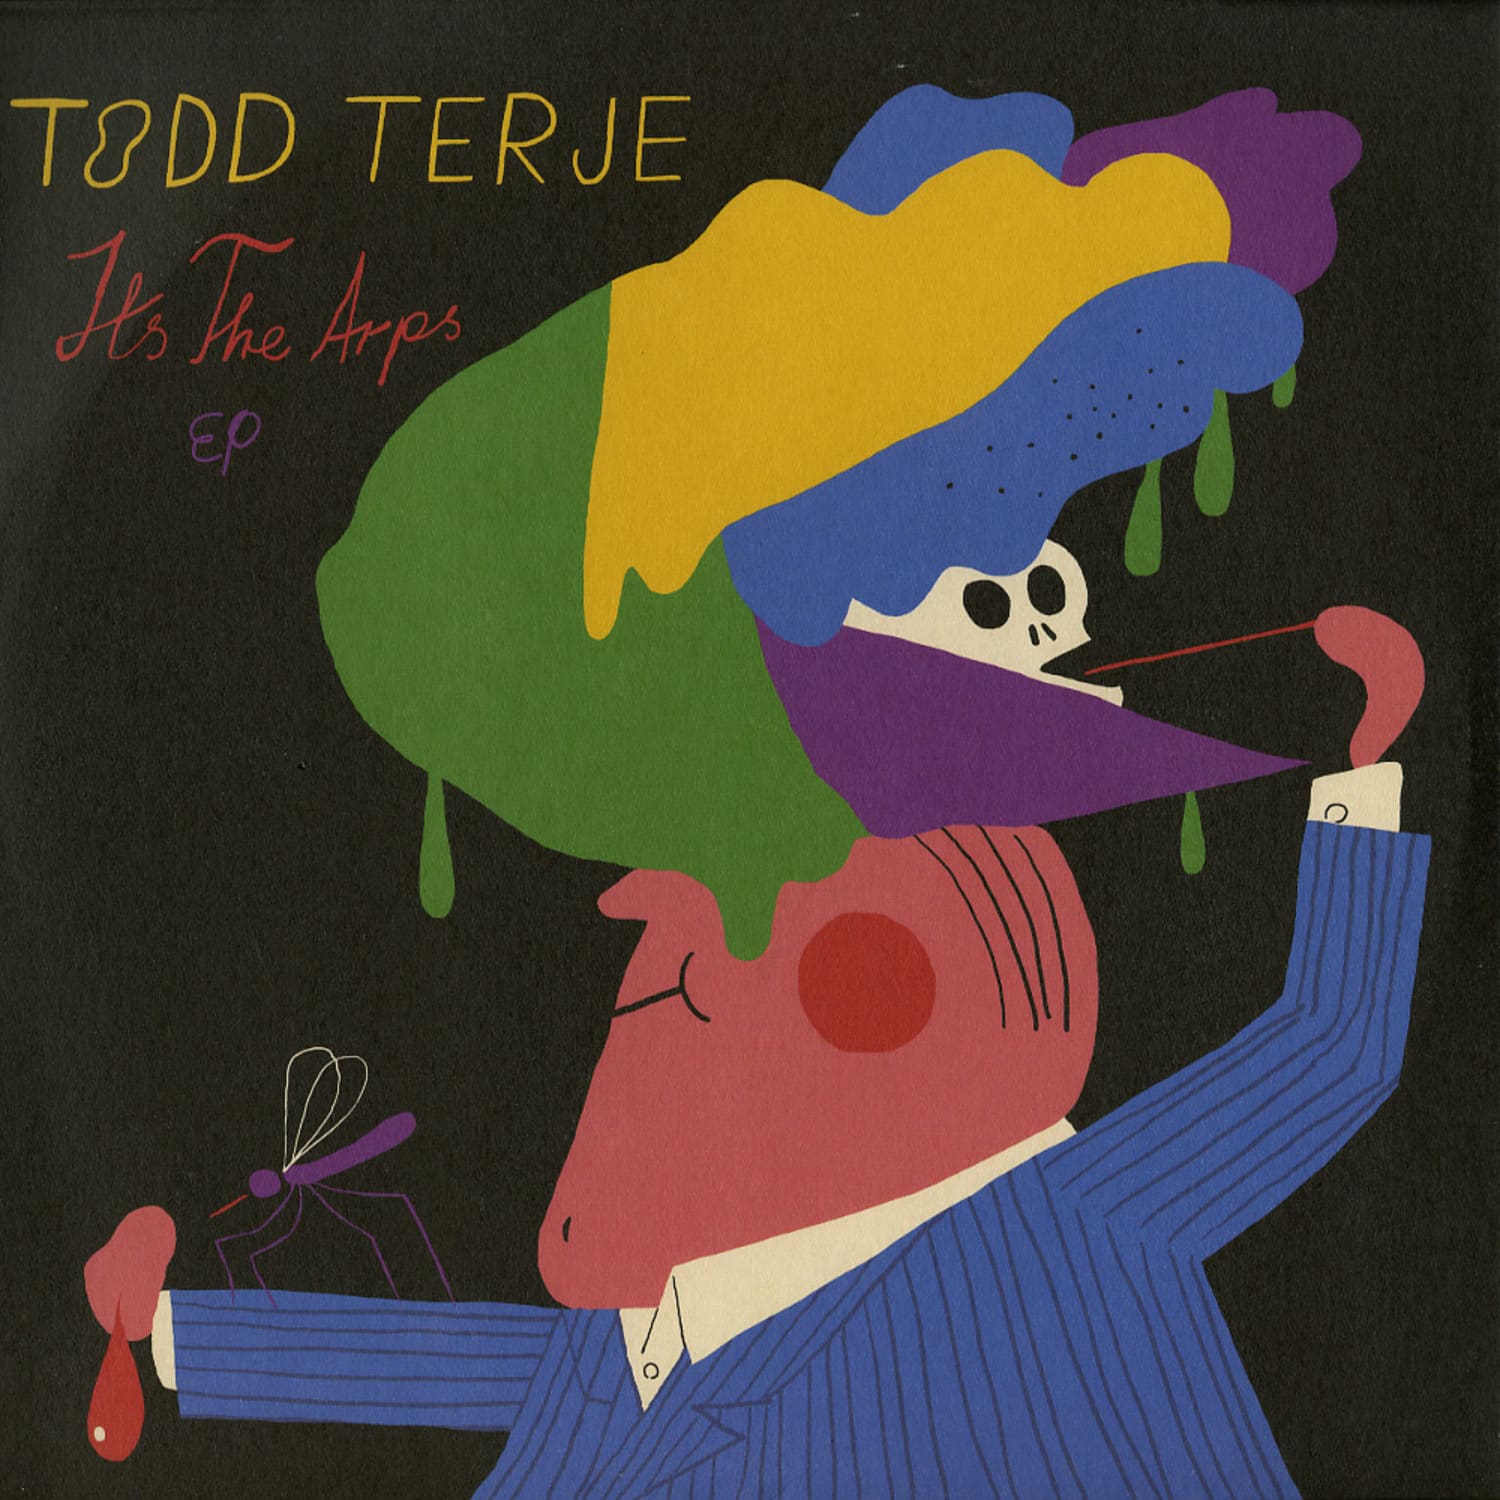 Todd Terje - ITS THE ARPS EP